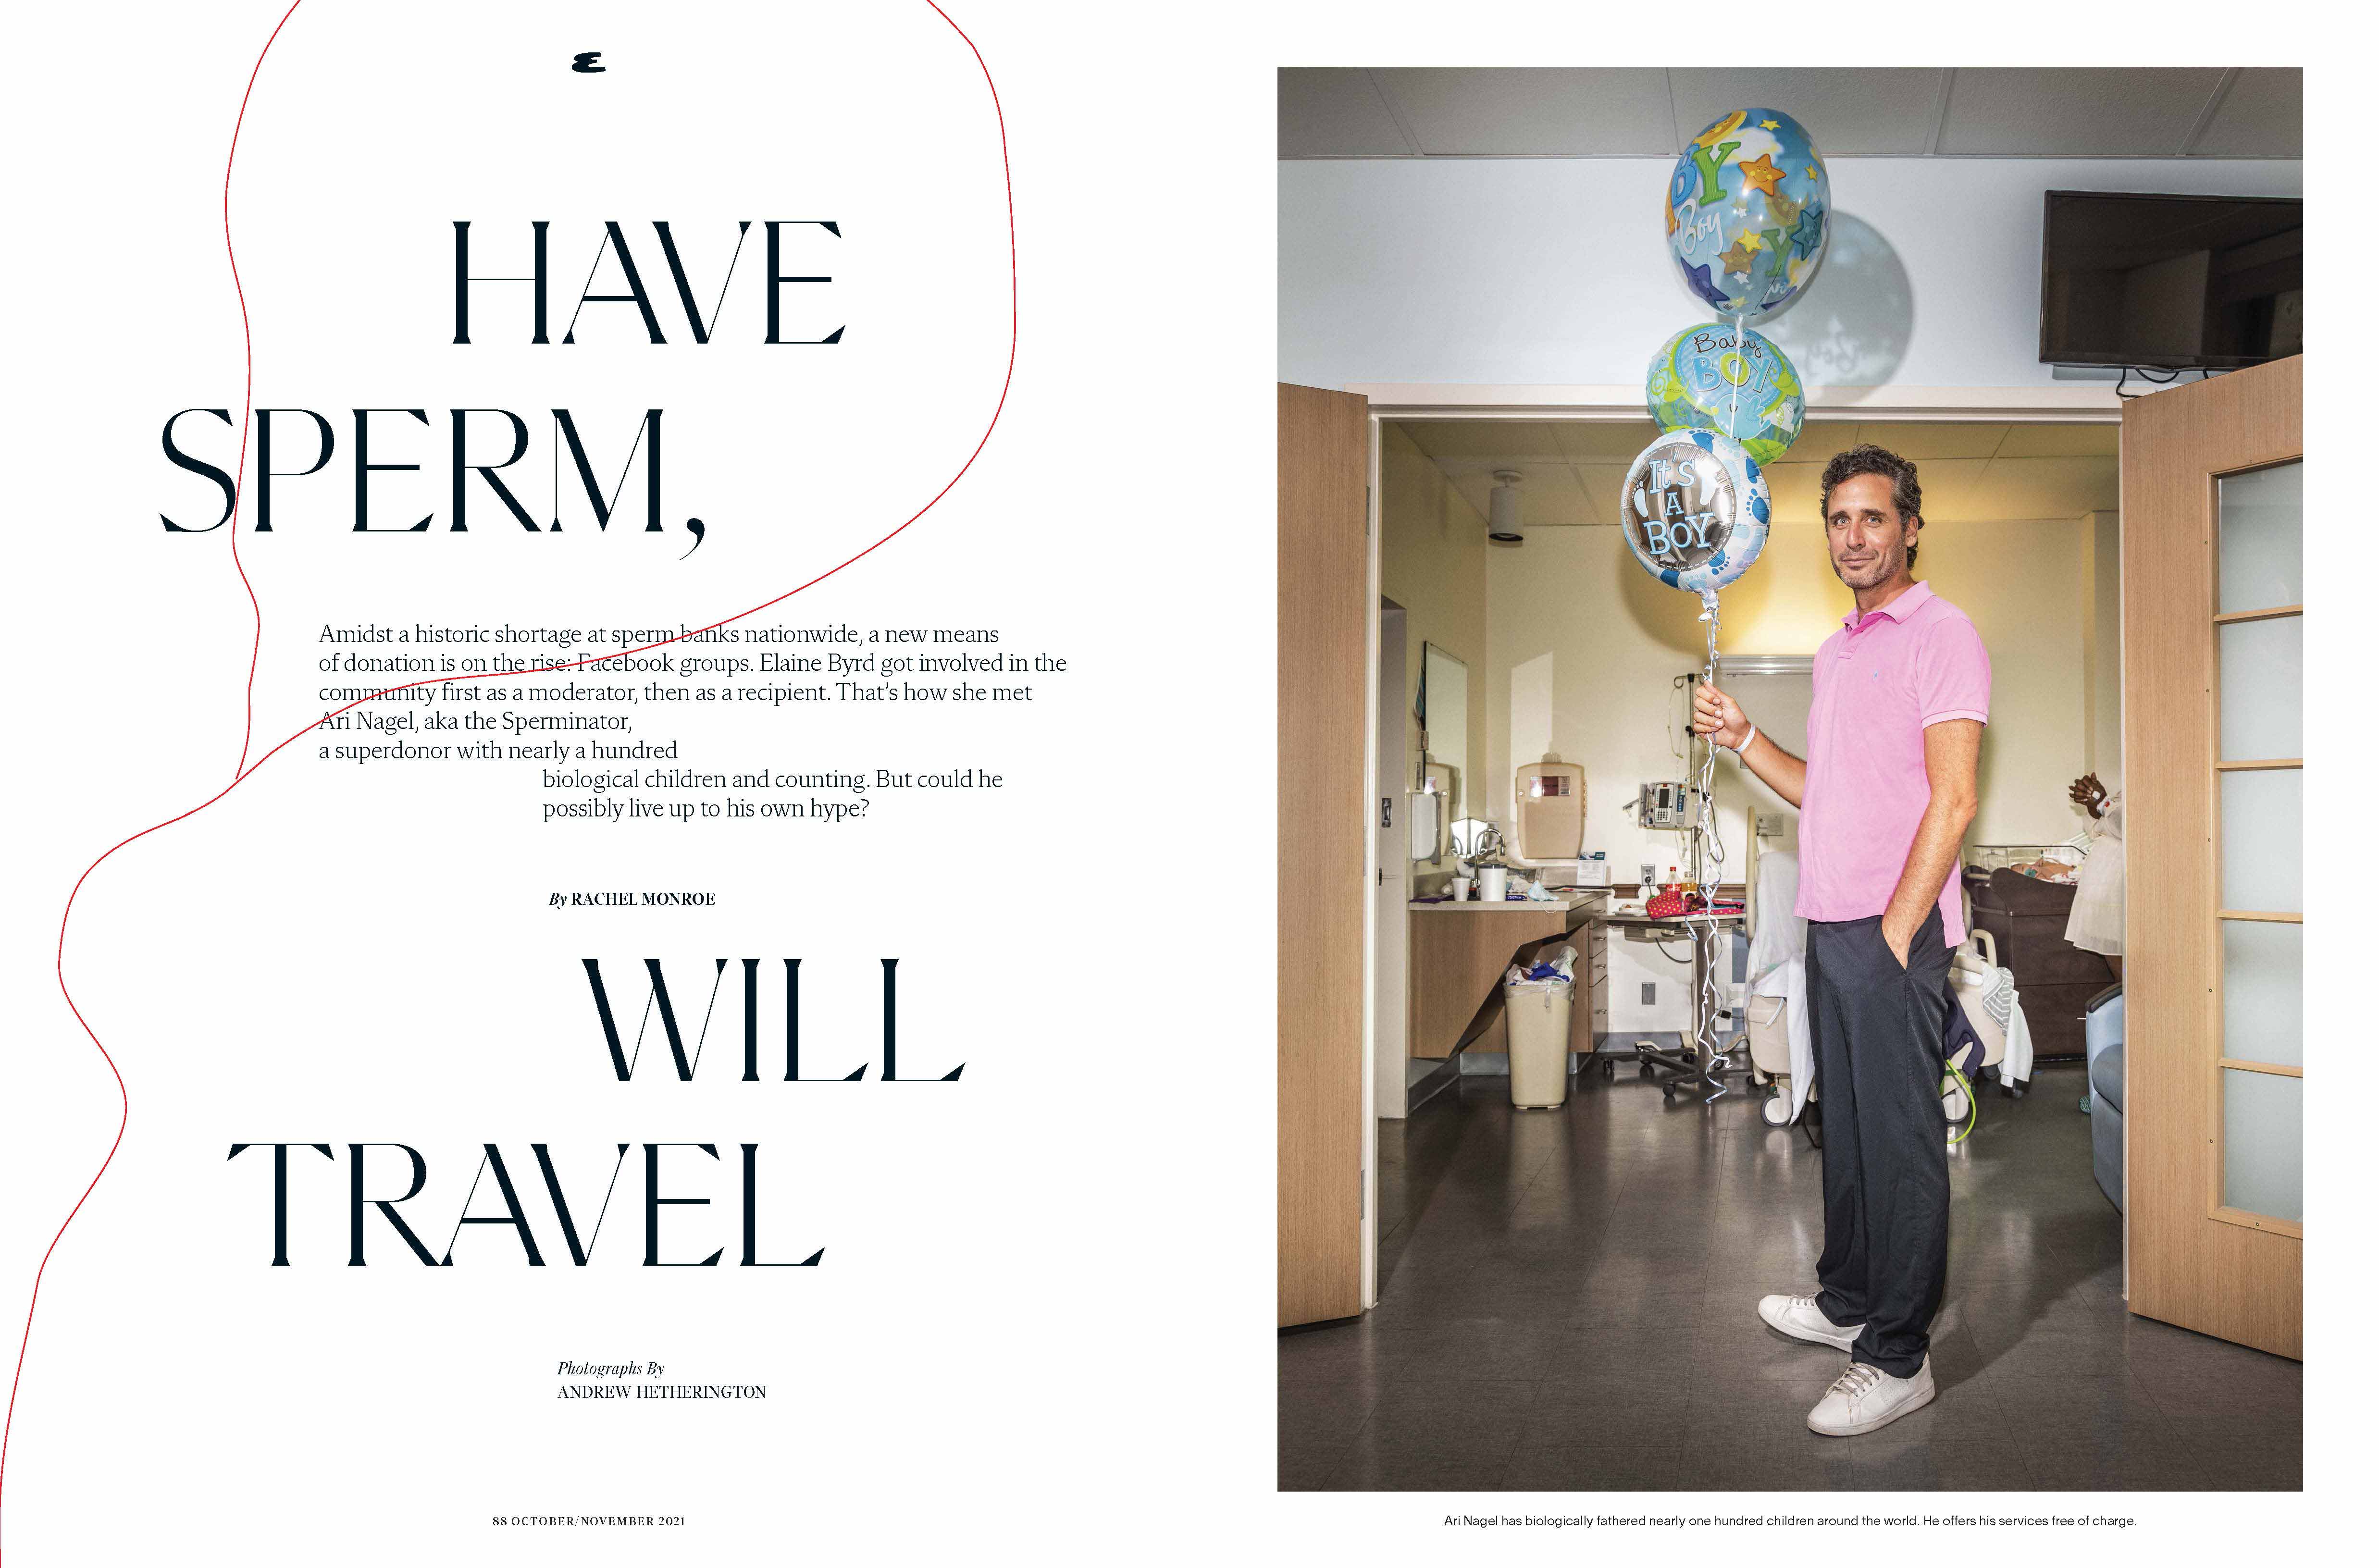 WEB-Have-Sperm-Will-Travel-by-Rachel-Monroe-Esquire-Oct-Nov-21--spreads_Page_1